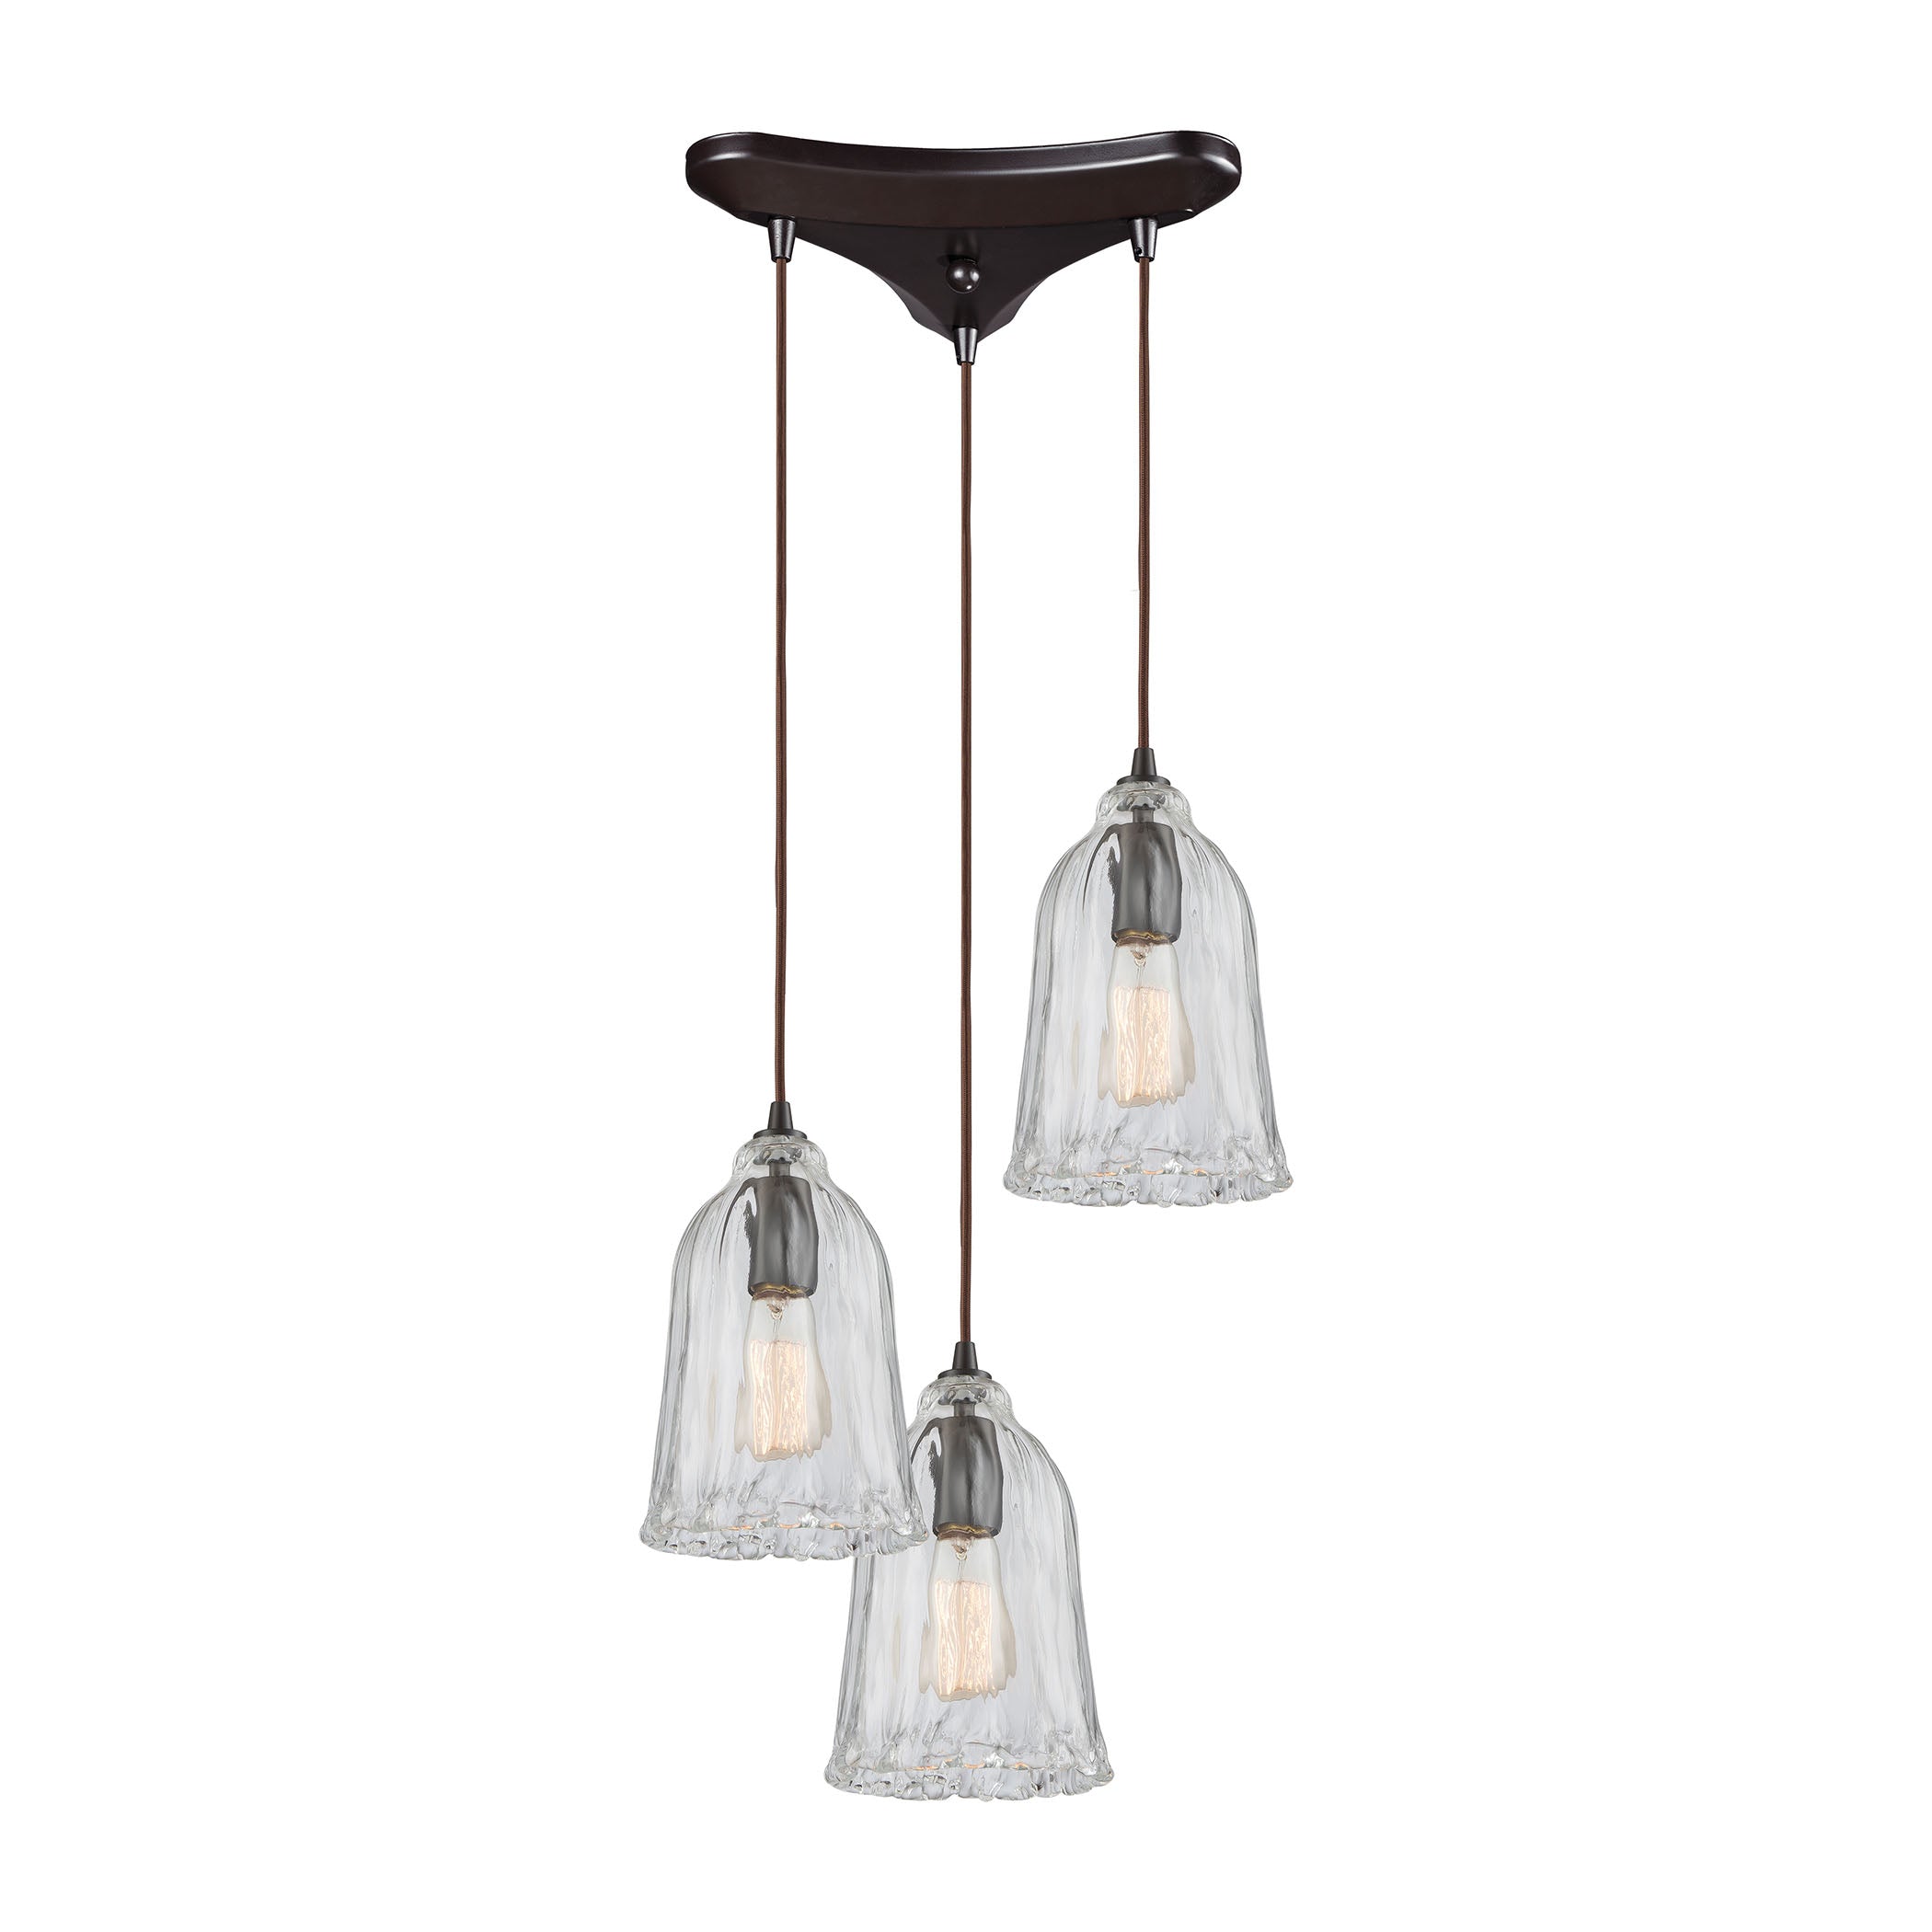 ELK Lighting 10671/3 Hand Formed Glass 3-Light Triangular Pendant Fixture in Oiled Bronze with Clear Hand-formed Glass